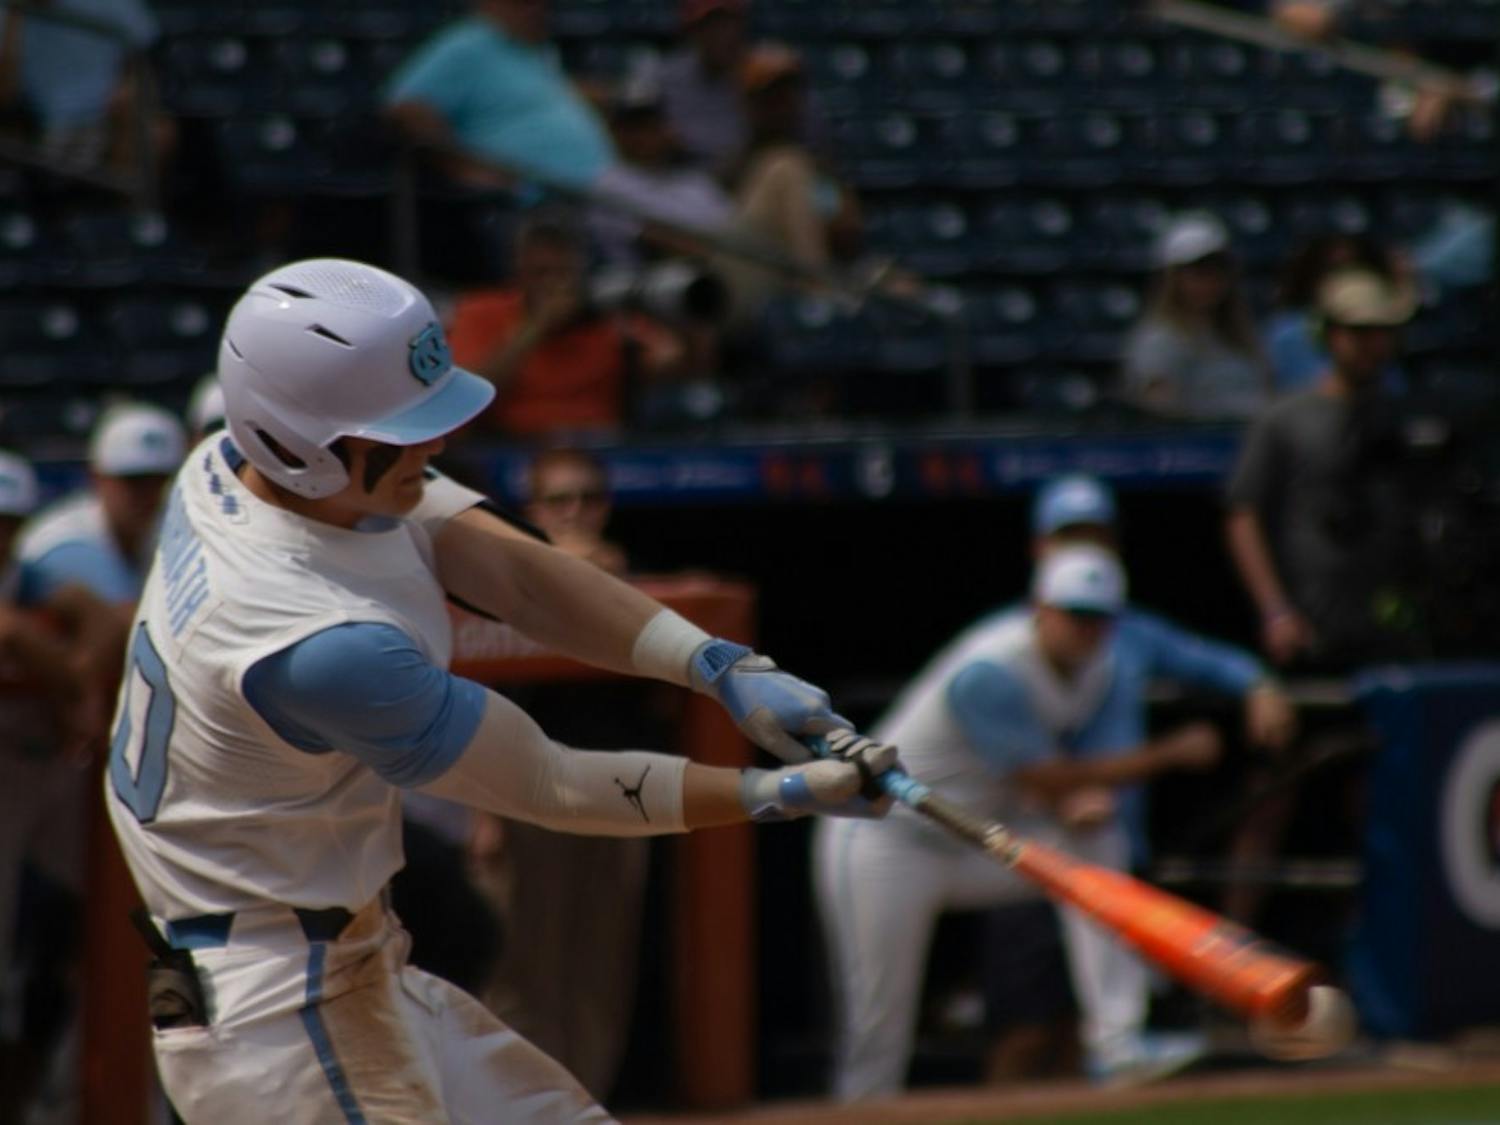 Junior infielder Mac Horvath swings at a pitch during a game against Georgia Tech on Tuesday, May 23, 2023. The Tar Heels won, 11-5.